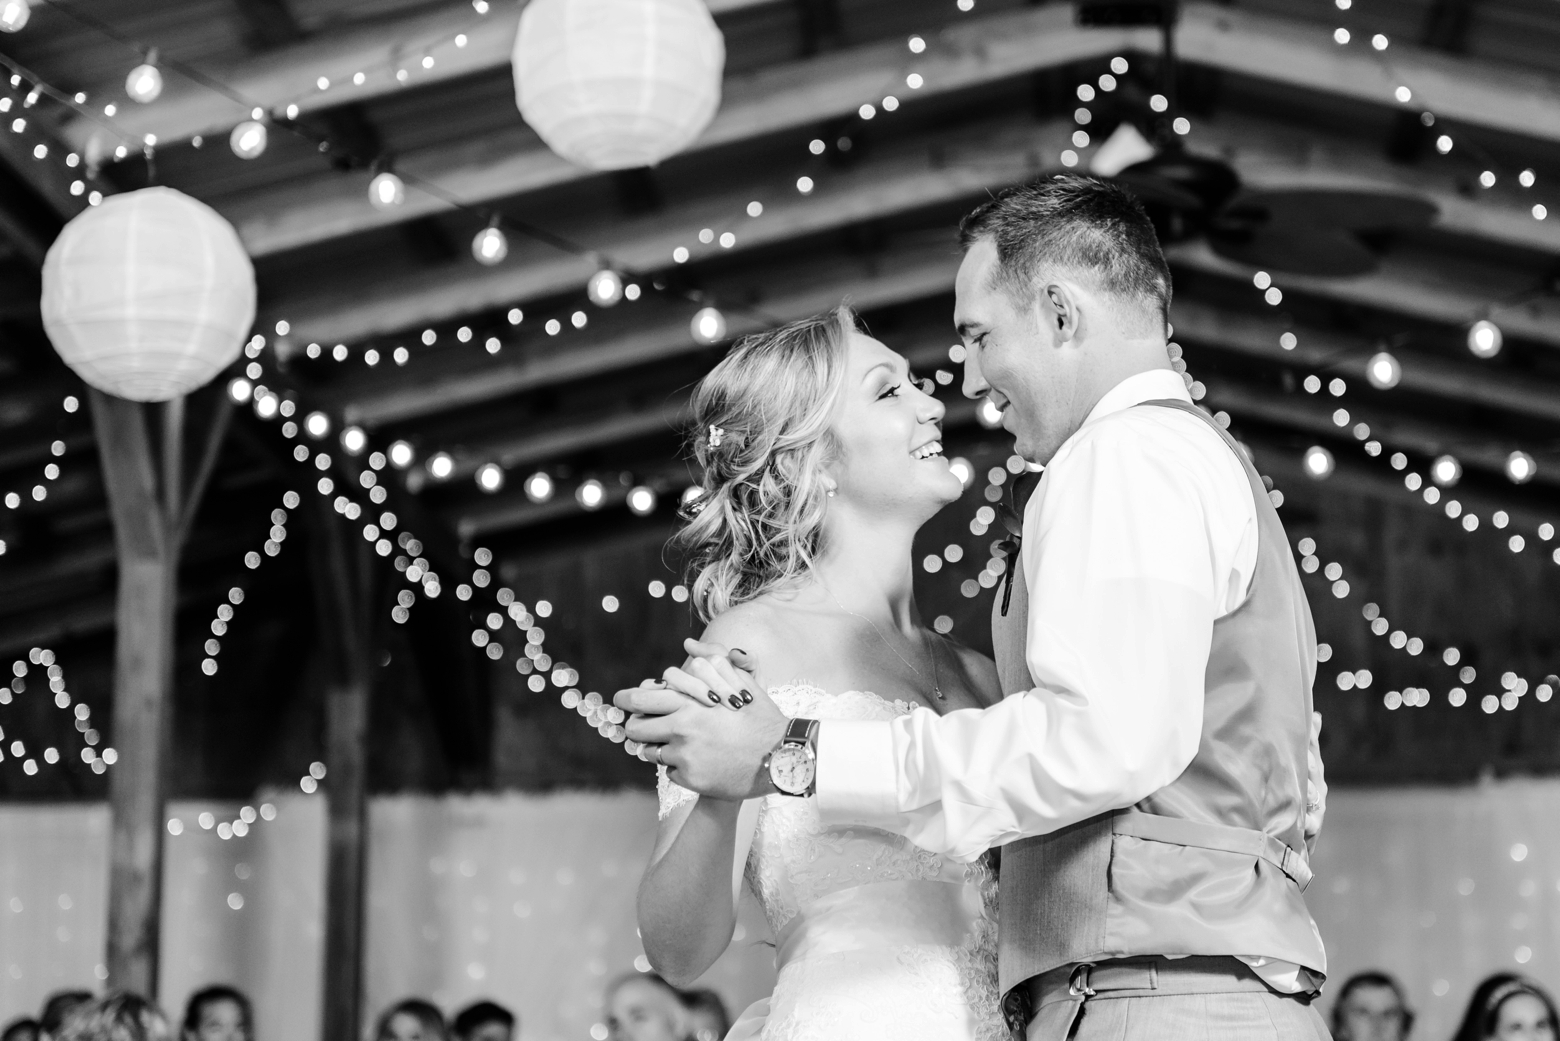 Bride and Groom share a first dance under all the twinkle lights during the reception of their Cross Creek Ranch wedding day